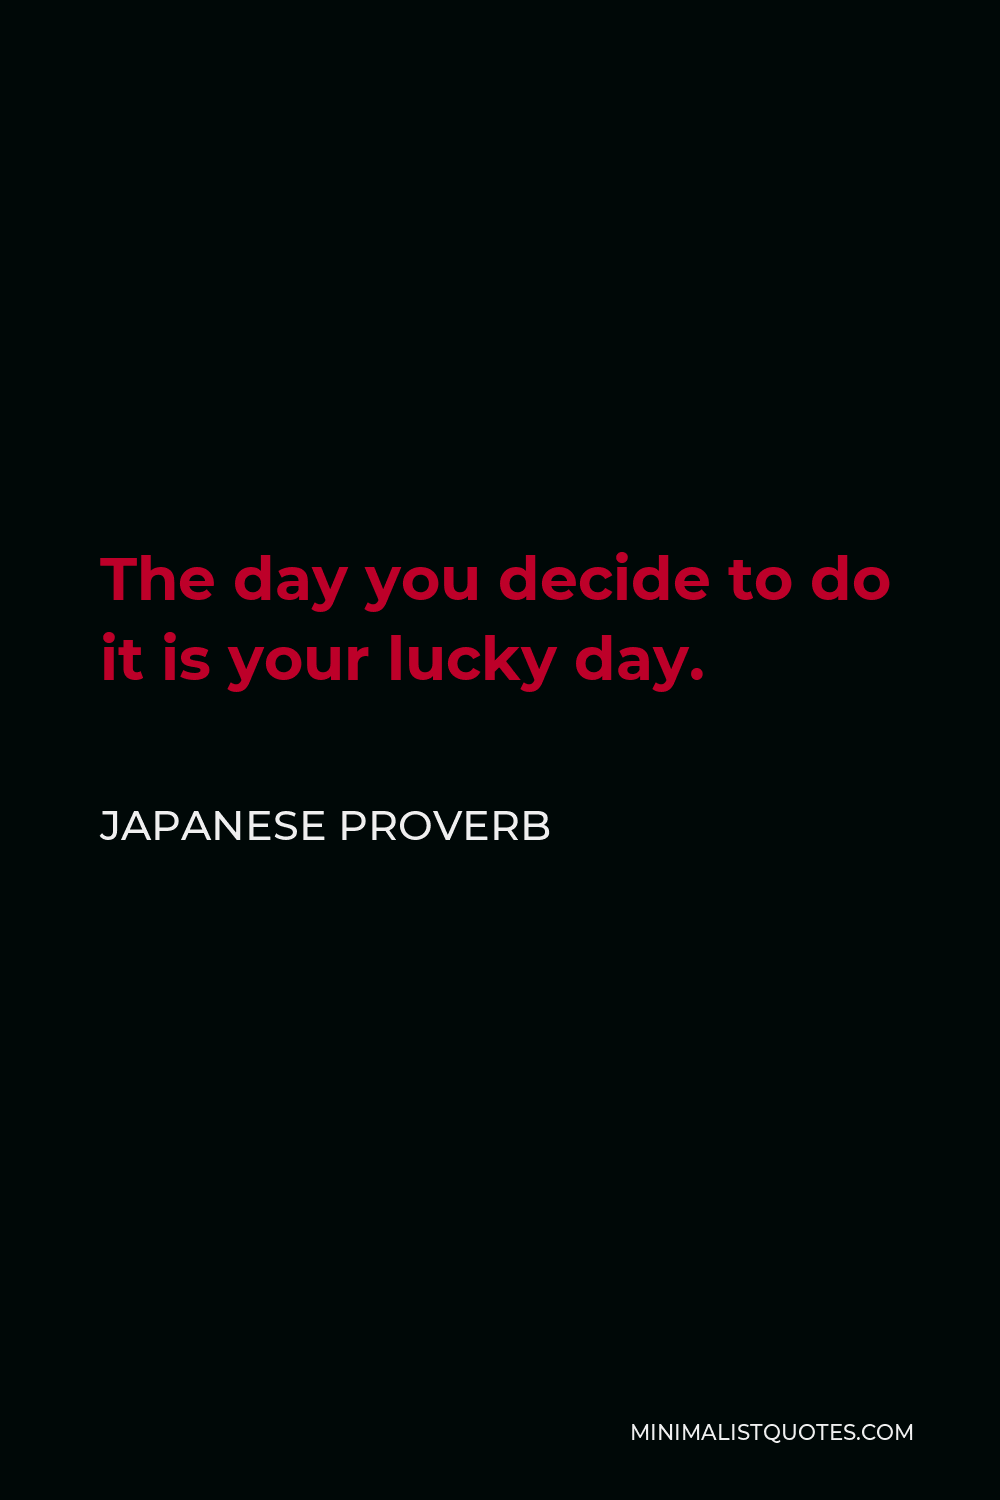 Japanese Proverb Quote - The day you decide to do it is your lucky day.